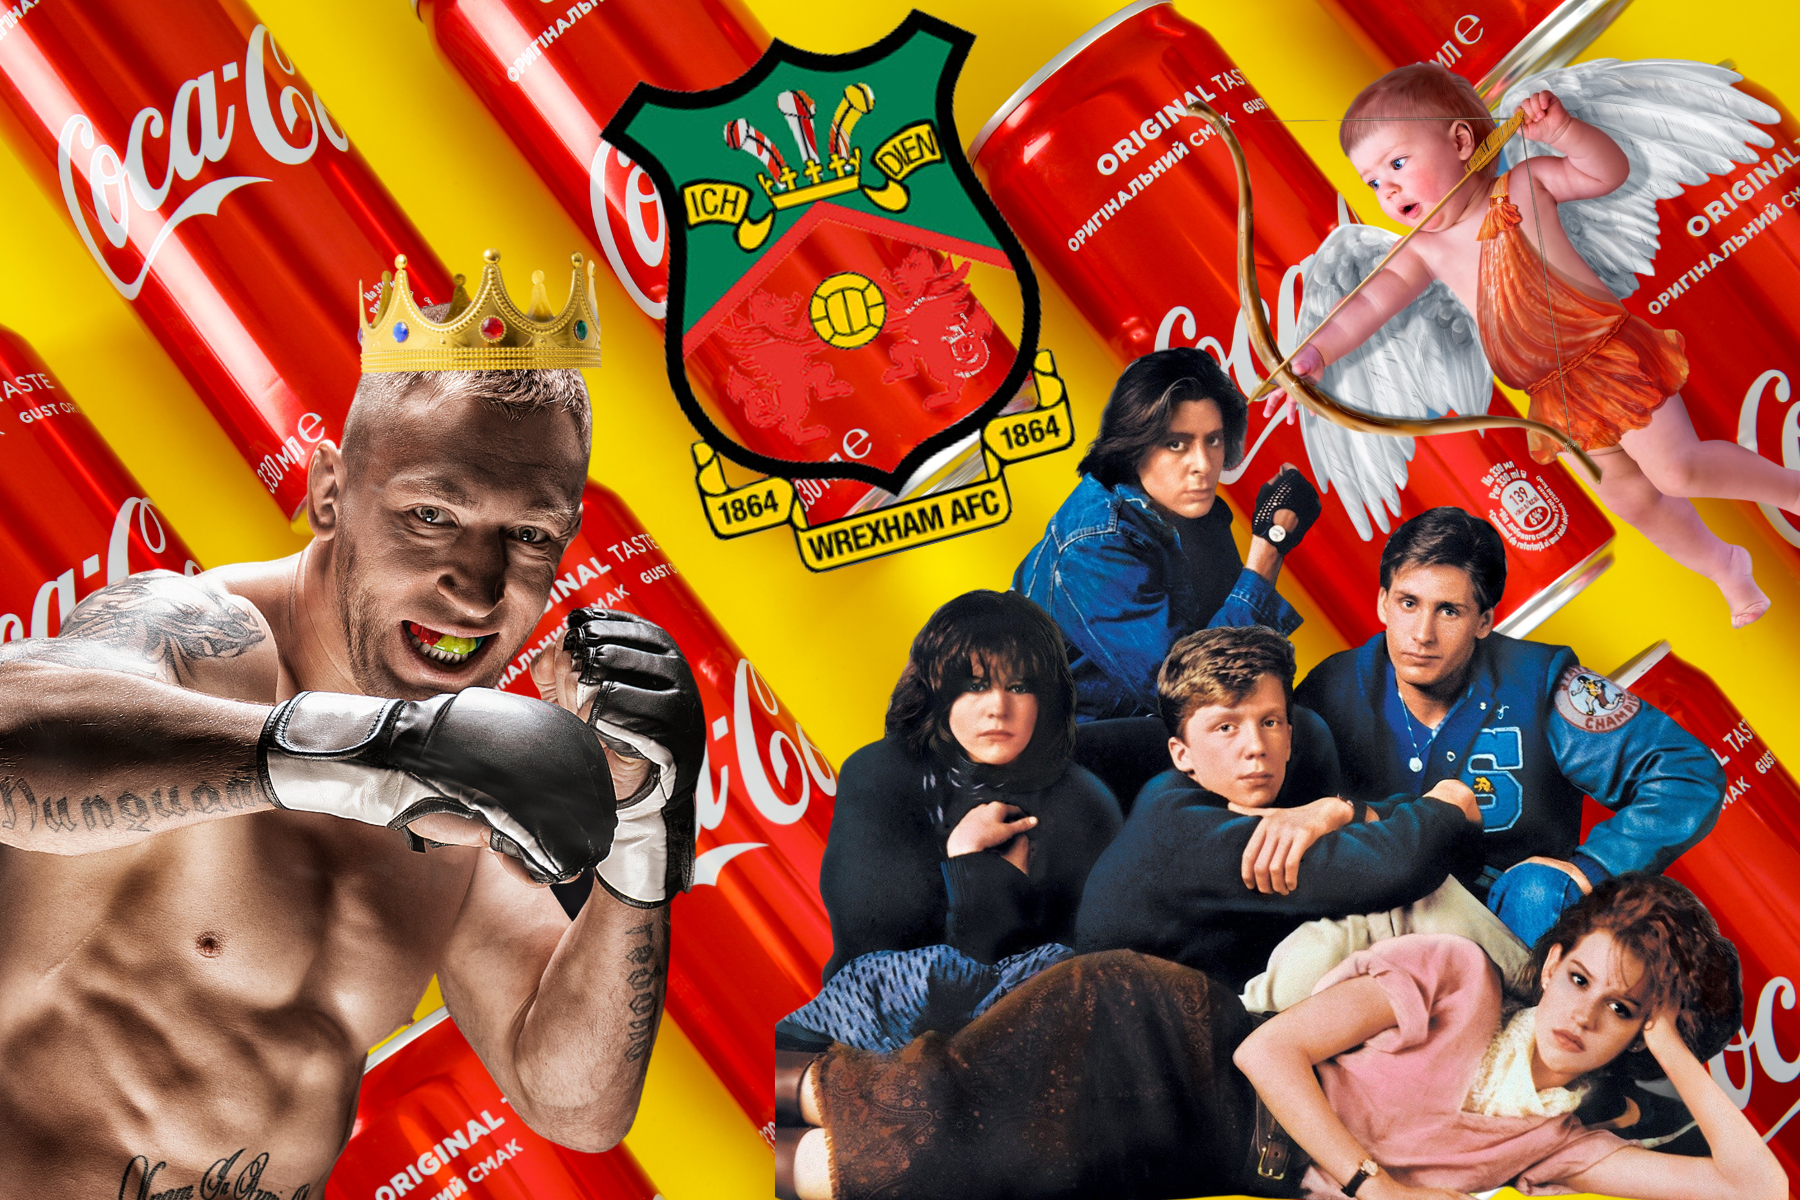 A collage of Coca-Cola cans, a UFC fighter, The Breakfast Club characters, Cupid and the Wrexham logo